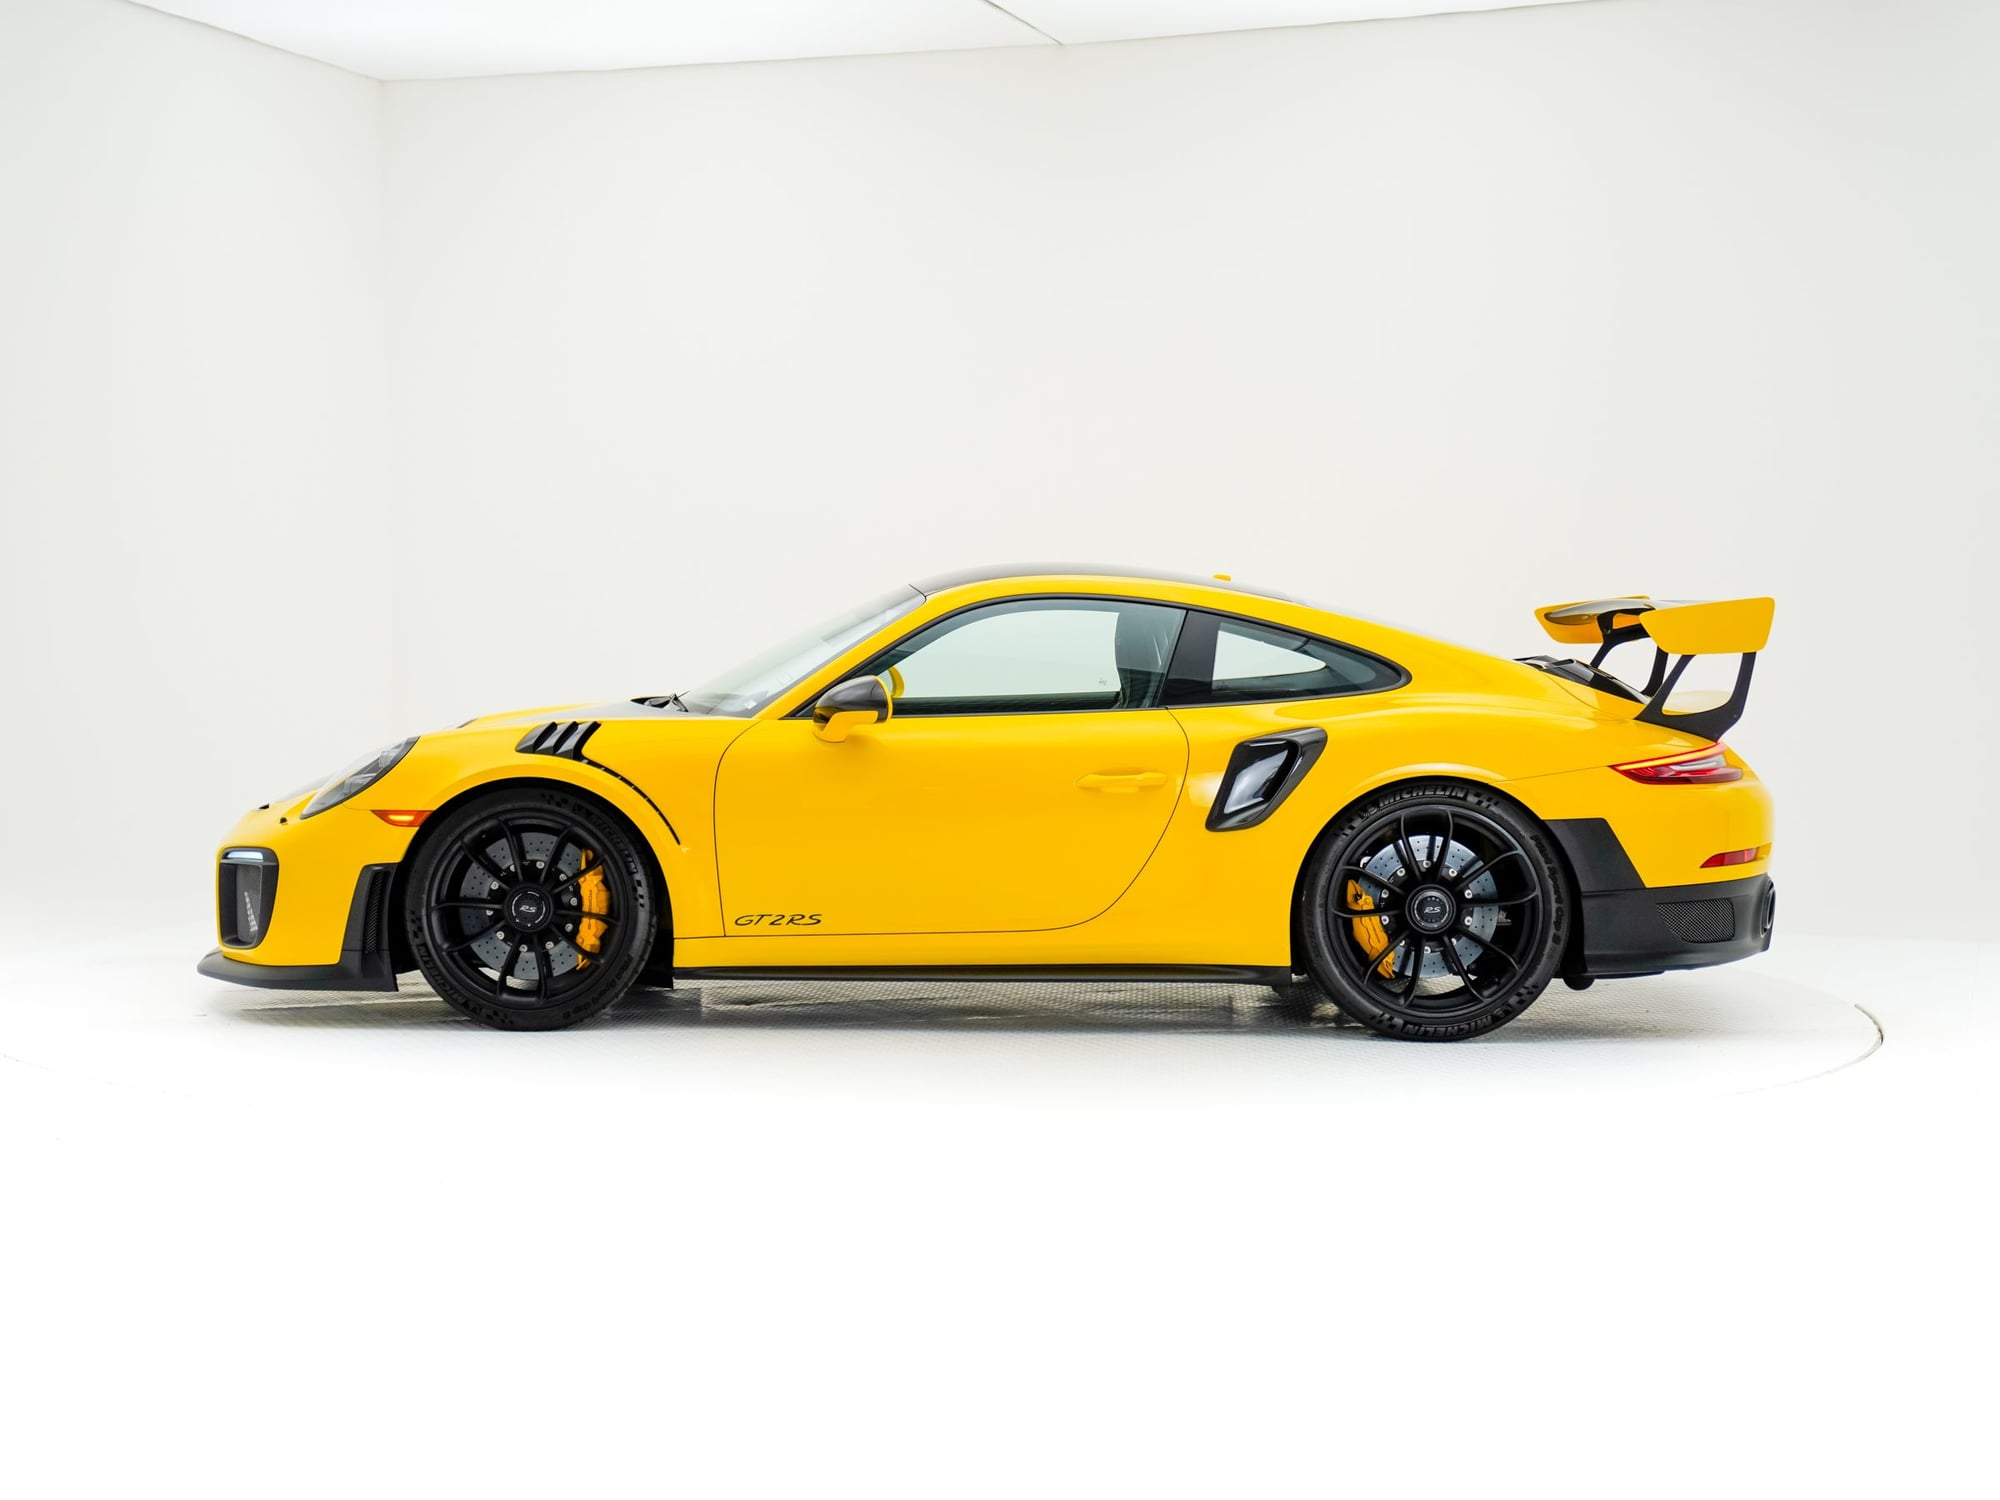 2018 Porsche GT2 - Dealer Inventory: 2018 Porsche 911 GT2 RS - Used - VIN WP0AE2A9XJS186084 - 1,250 Miles - 6 cyl - 2WD - Automatic - Coupe - Yellow - Beaverton, OR 97005, United States